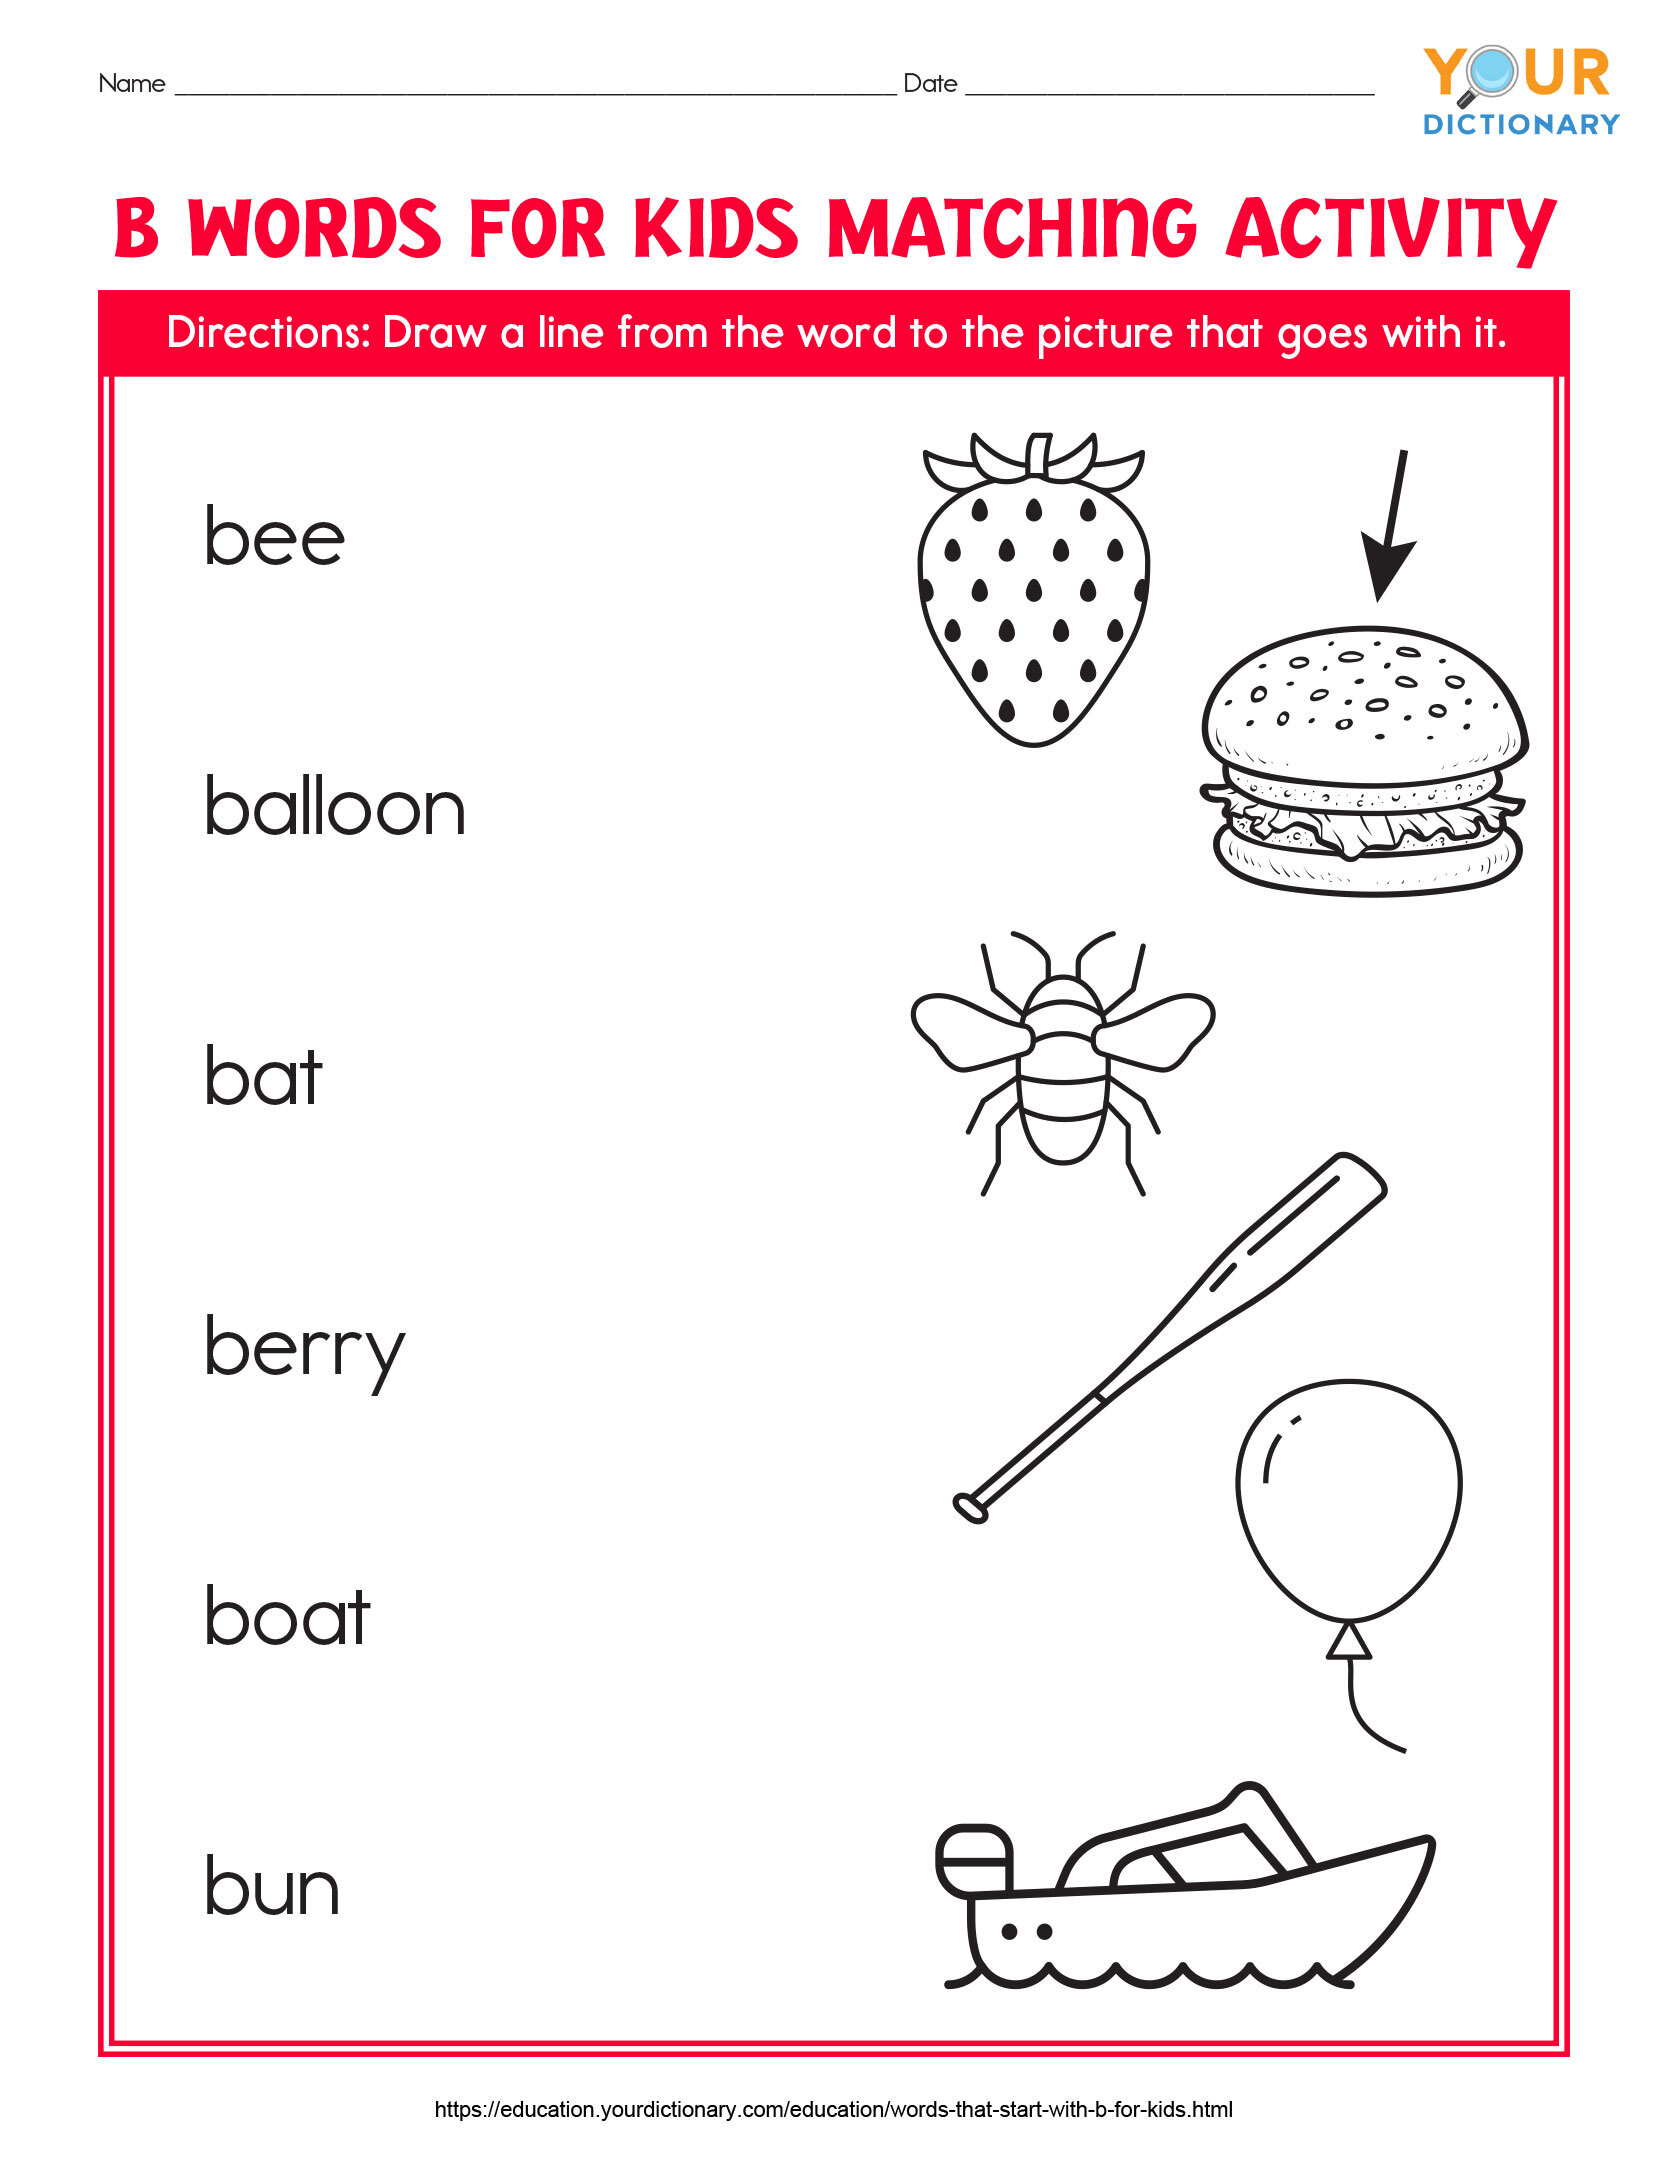 b words for kids matching activity